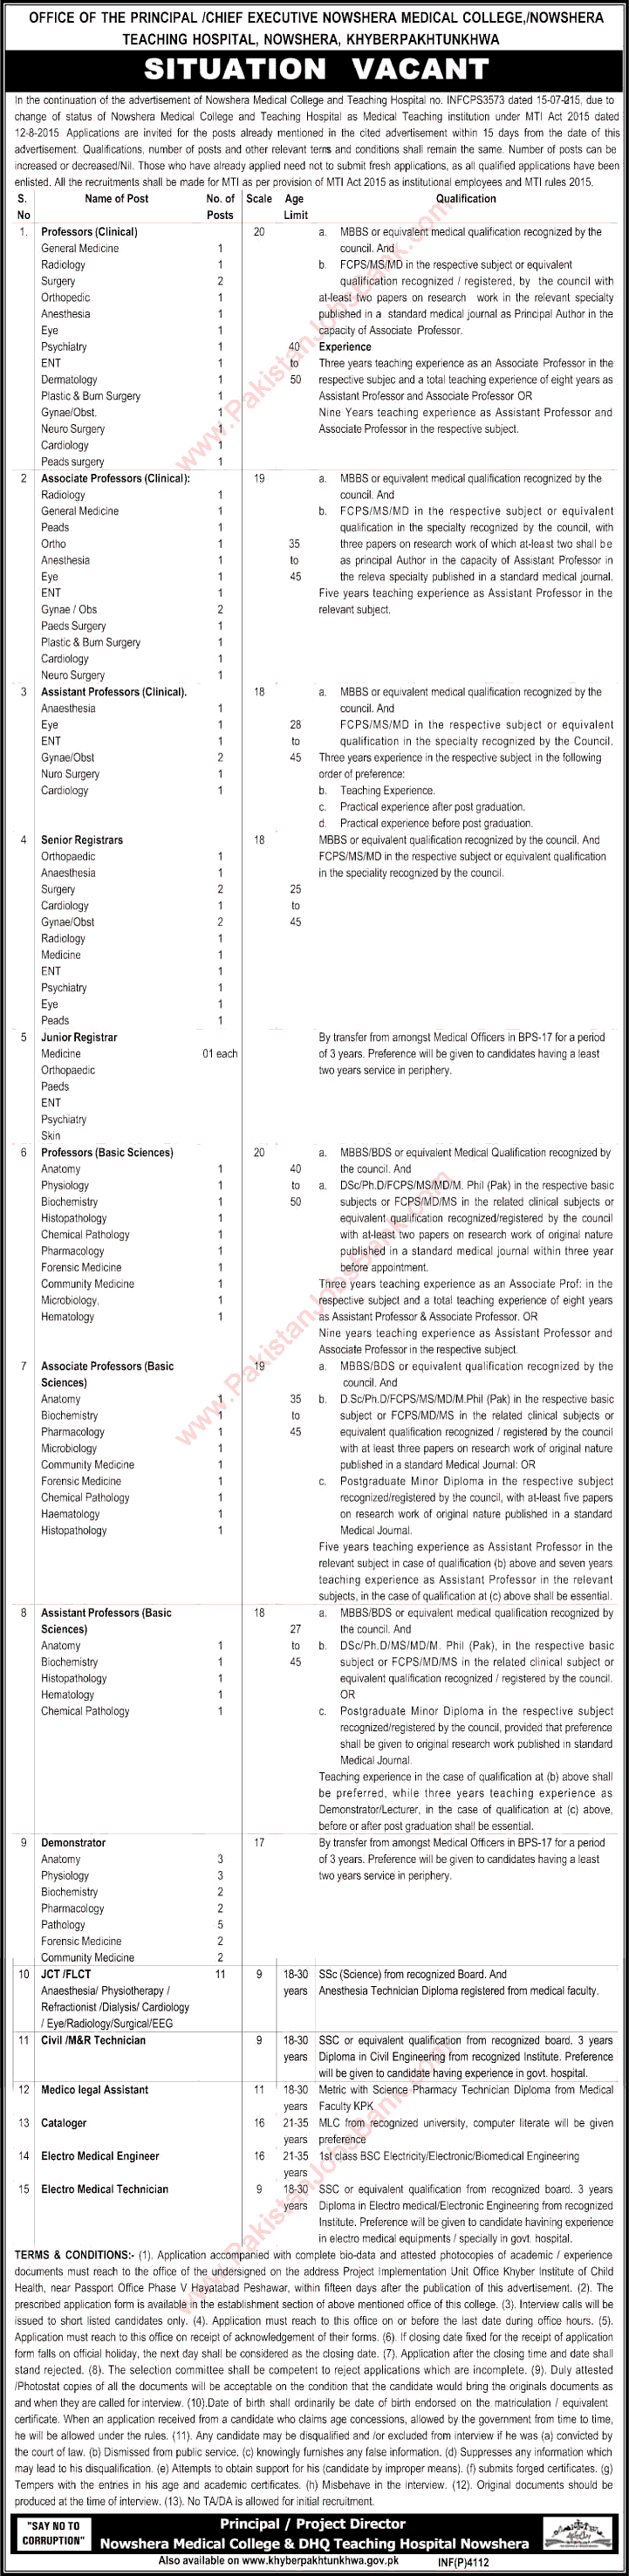 Nowshera Medical College Jobs 2015 August KPK Teaching Faculty, Medical Technicians & Others